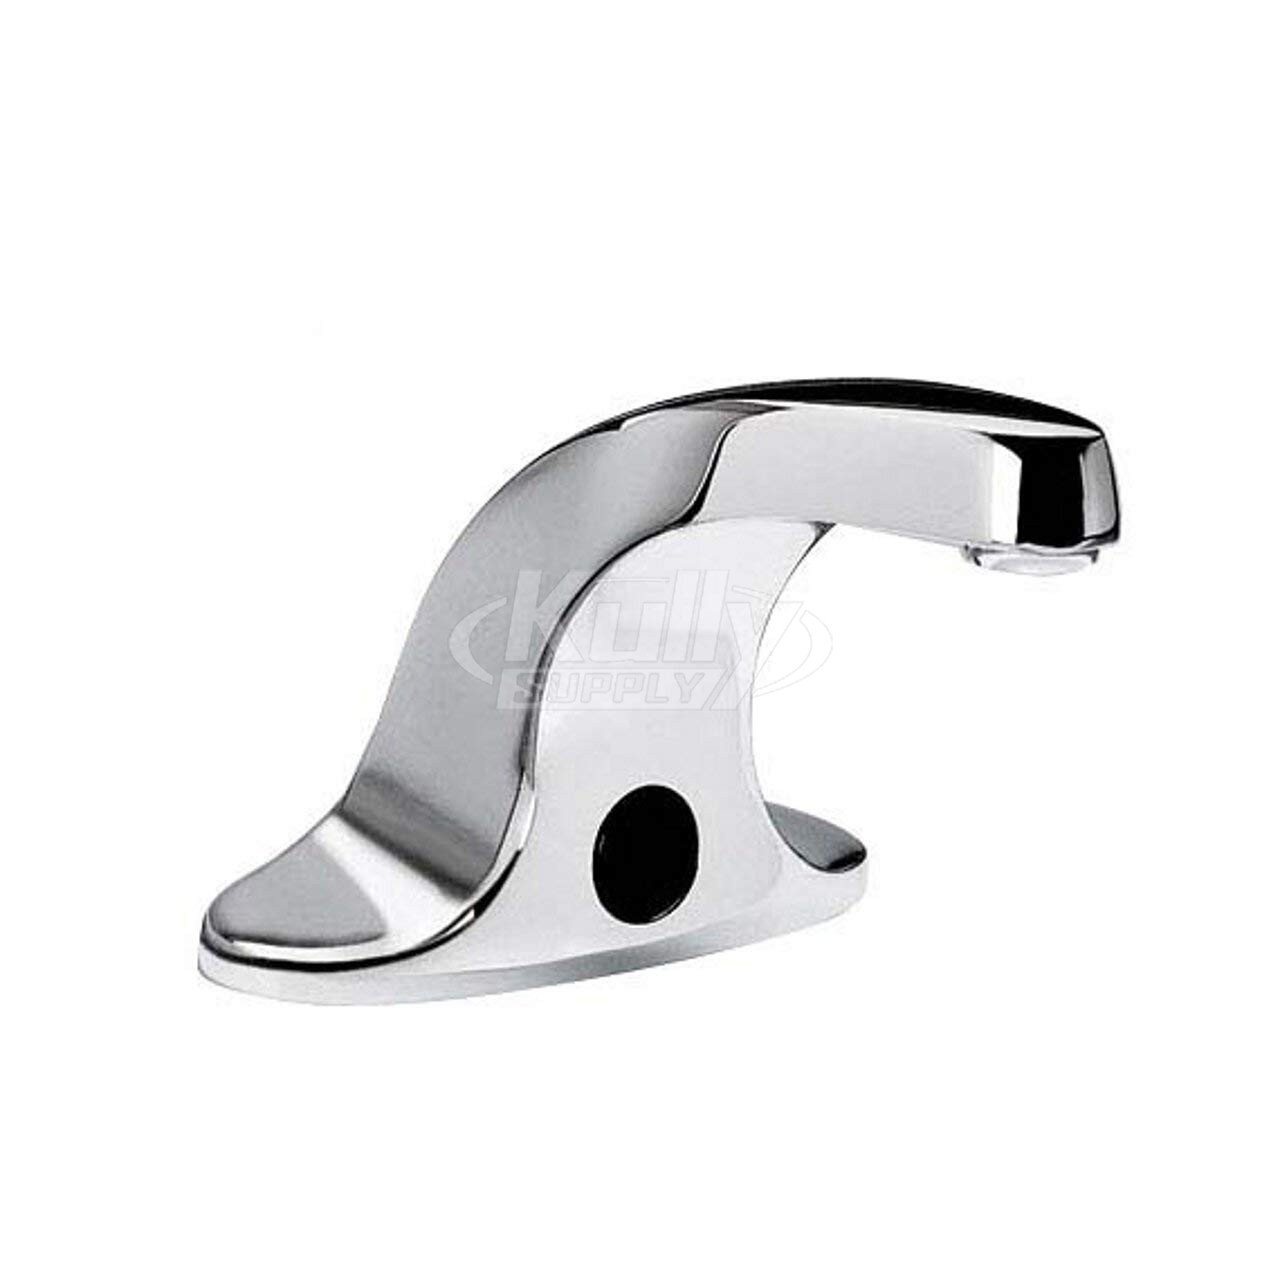 American Standard 6055.205.002 Electronic Faucet with Cast Spout